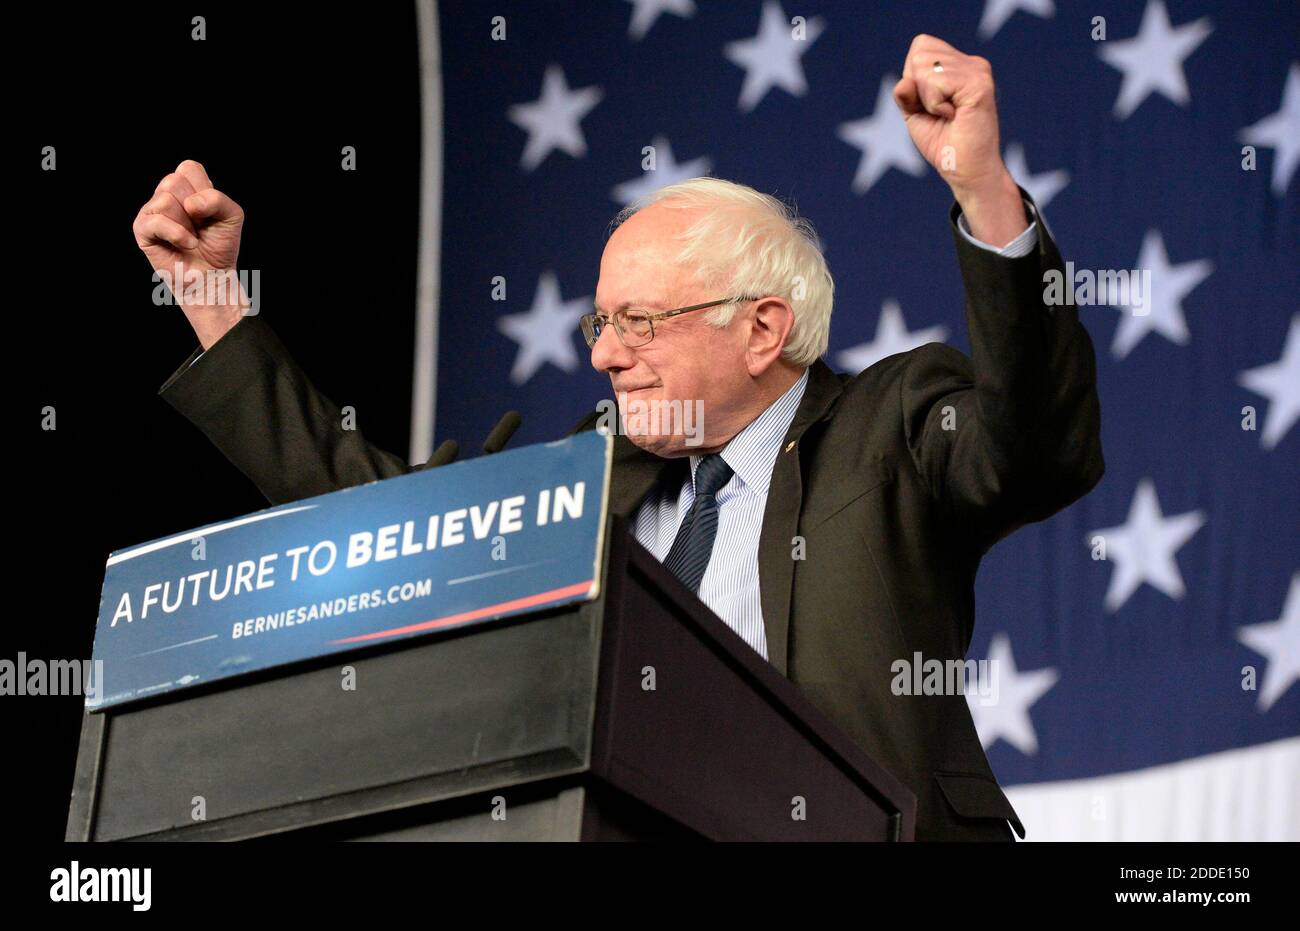 NO FILM, NO VIDEO, NO TV, NO DOCUMENTARY - Democratic presidential candidate Sen. Bernie Sanders speaks to supporters at PNC Music Pavilion in Charlotte, NC, USA, on Monday, March 14, 2016. Photo by David T. Foster III/Charlotte Observer/TNS/ABACAPRESS.COM Stock Photo